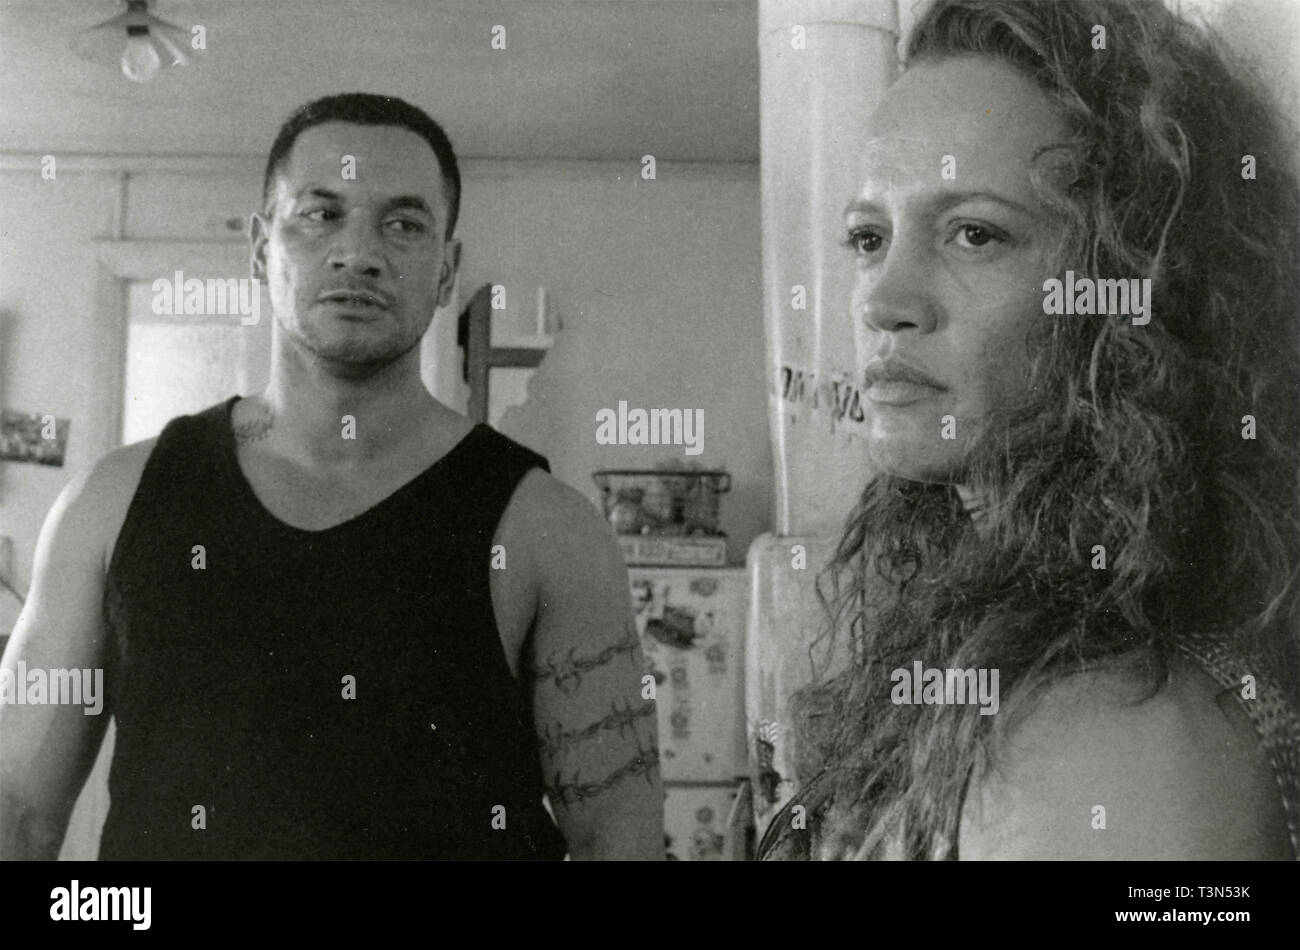 Actors Temuera Morrison and Rena Owen in the movie Once Were Warriors, 1994 Stock Photo